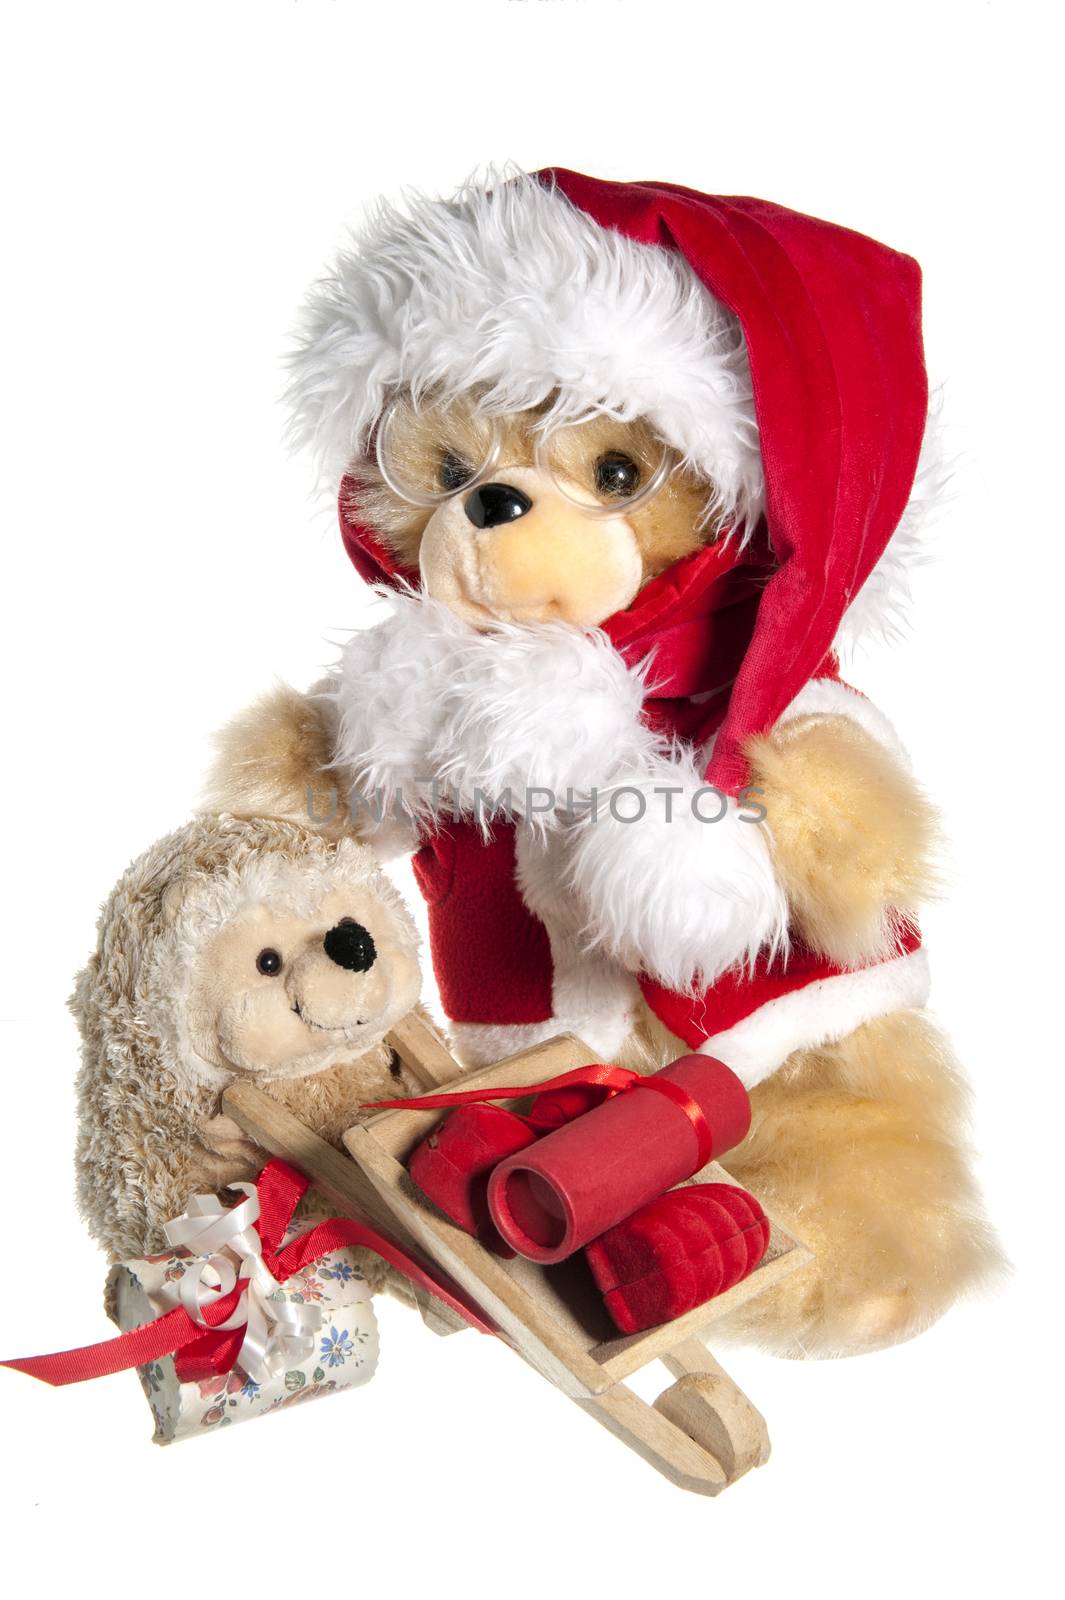 doll with hat of santa claus and gifts by carla720